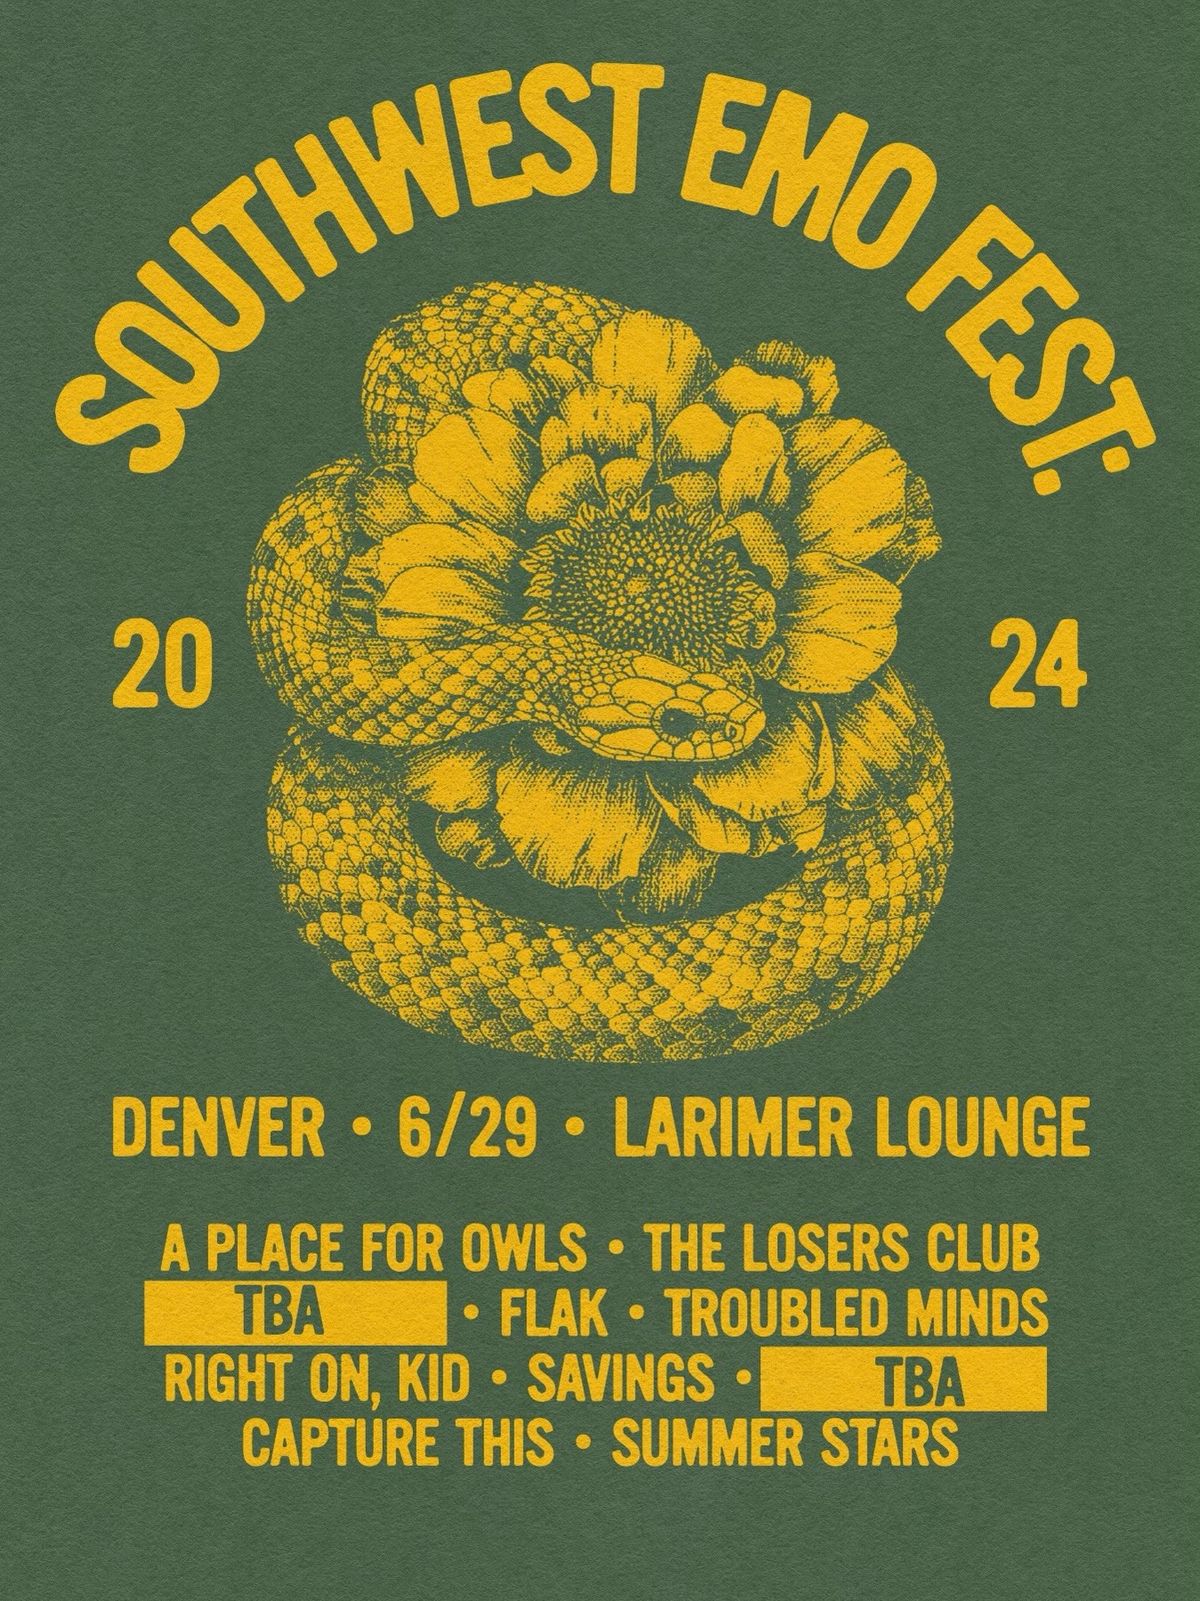 Southwest Emo Fest Feat. A Place For Owls, The Losers Club, Flak, Troubled Minds + more